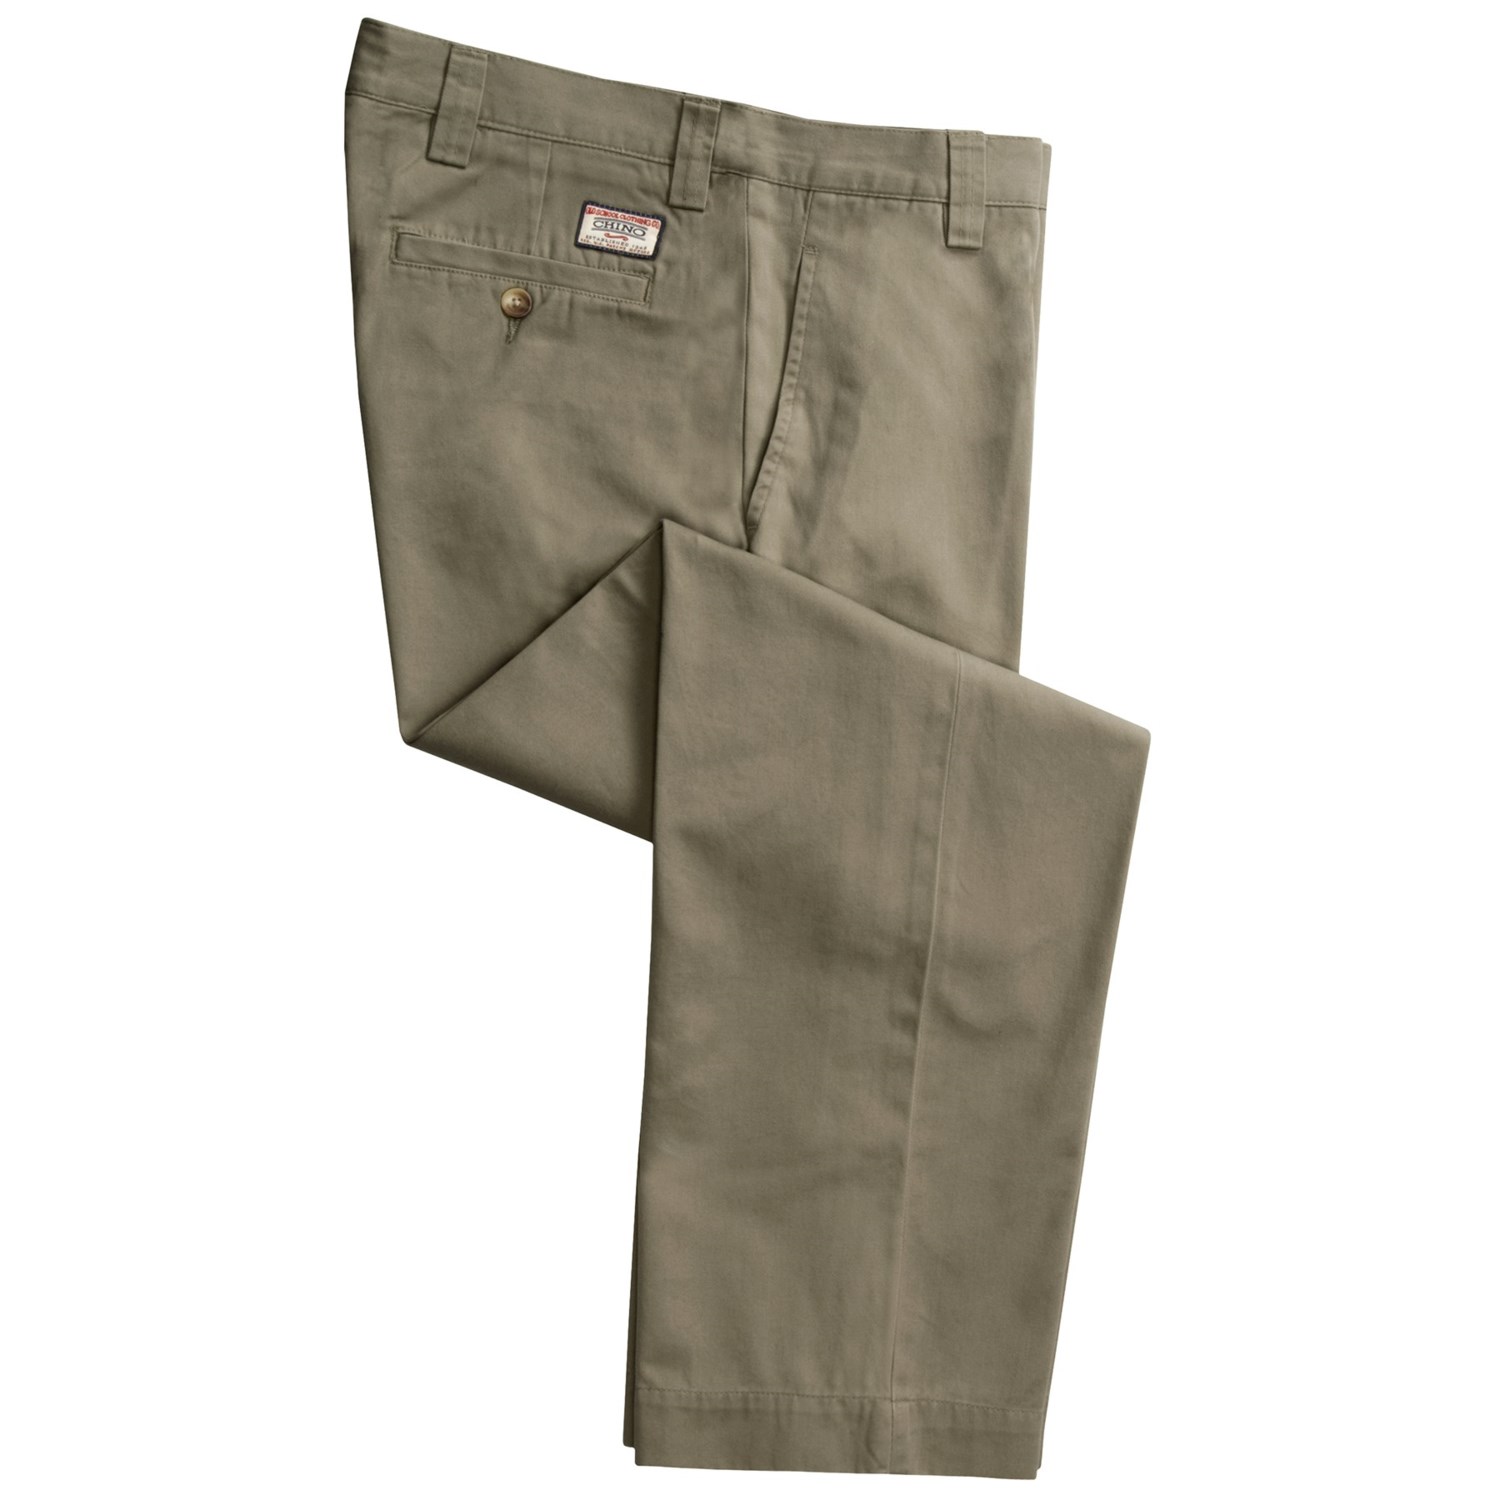 Cotton Twill Pants (For Men) 2154T - Save 96%